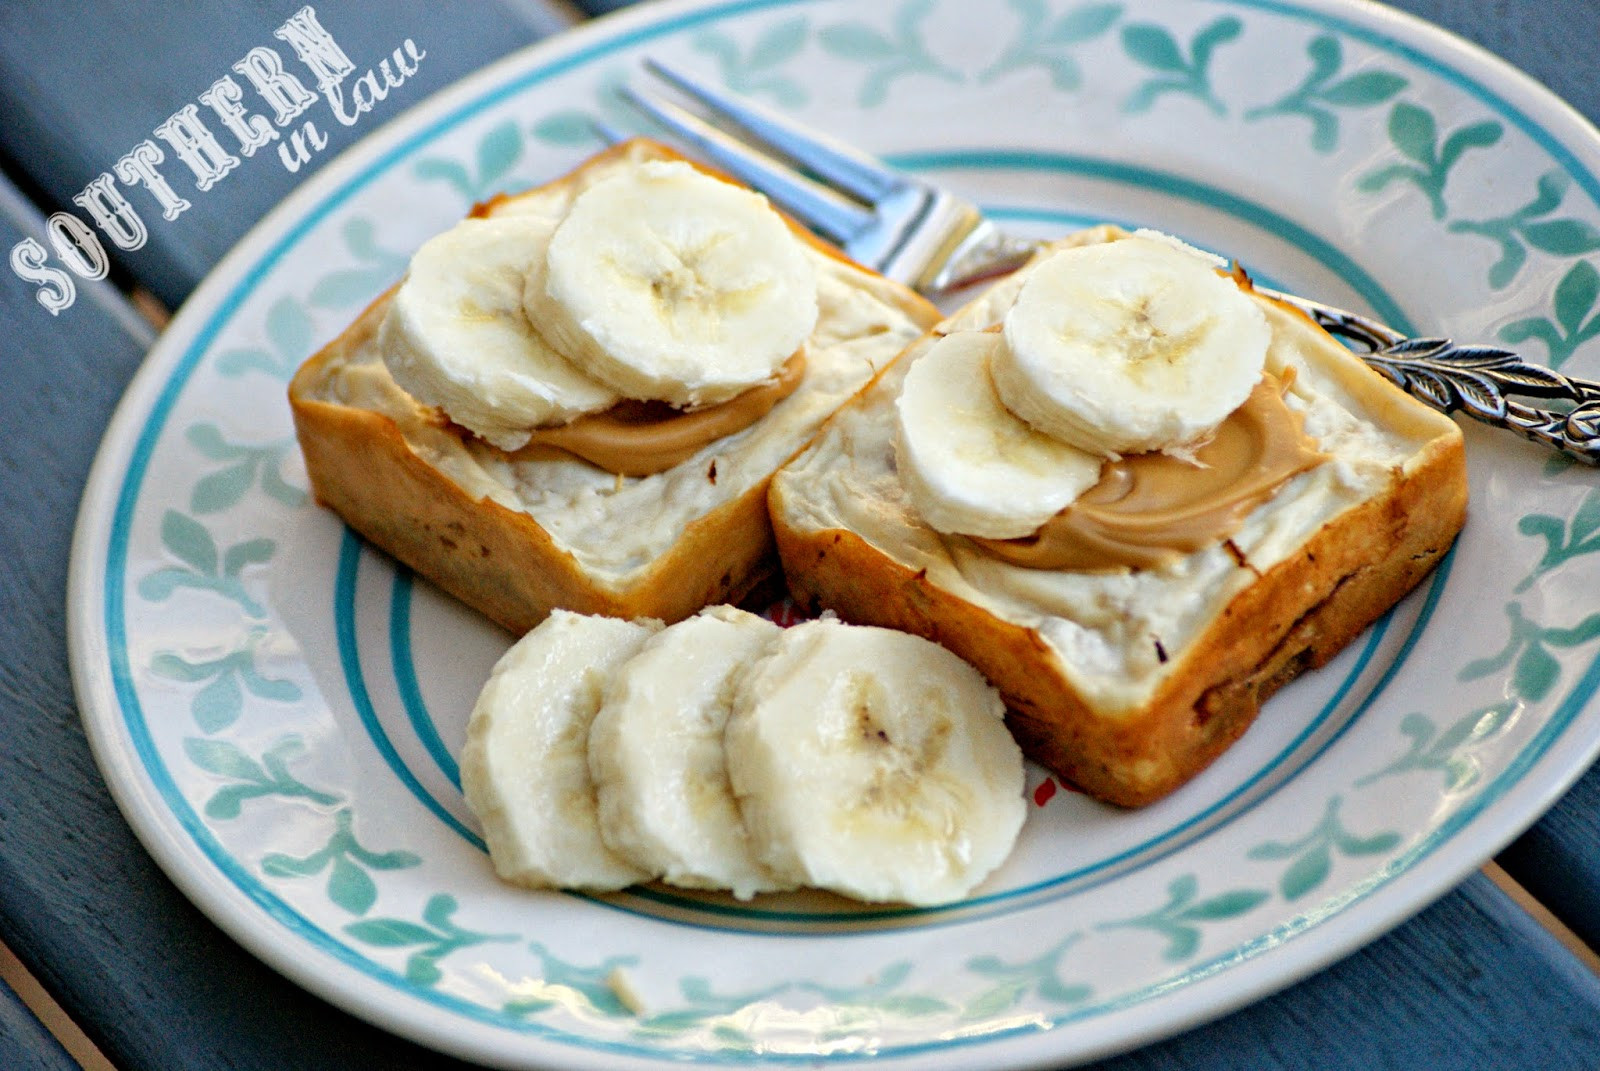 Is A Banana A Healthy Breakfast 20 Best southern In Law Recipe Mini Baked Banana Cheesecakes so